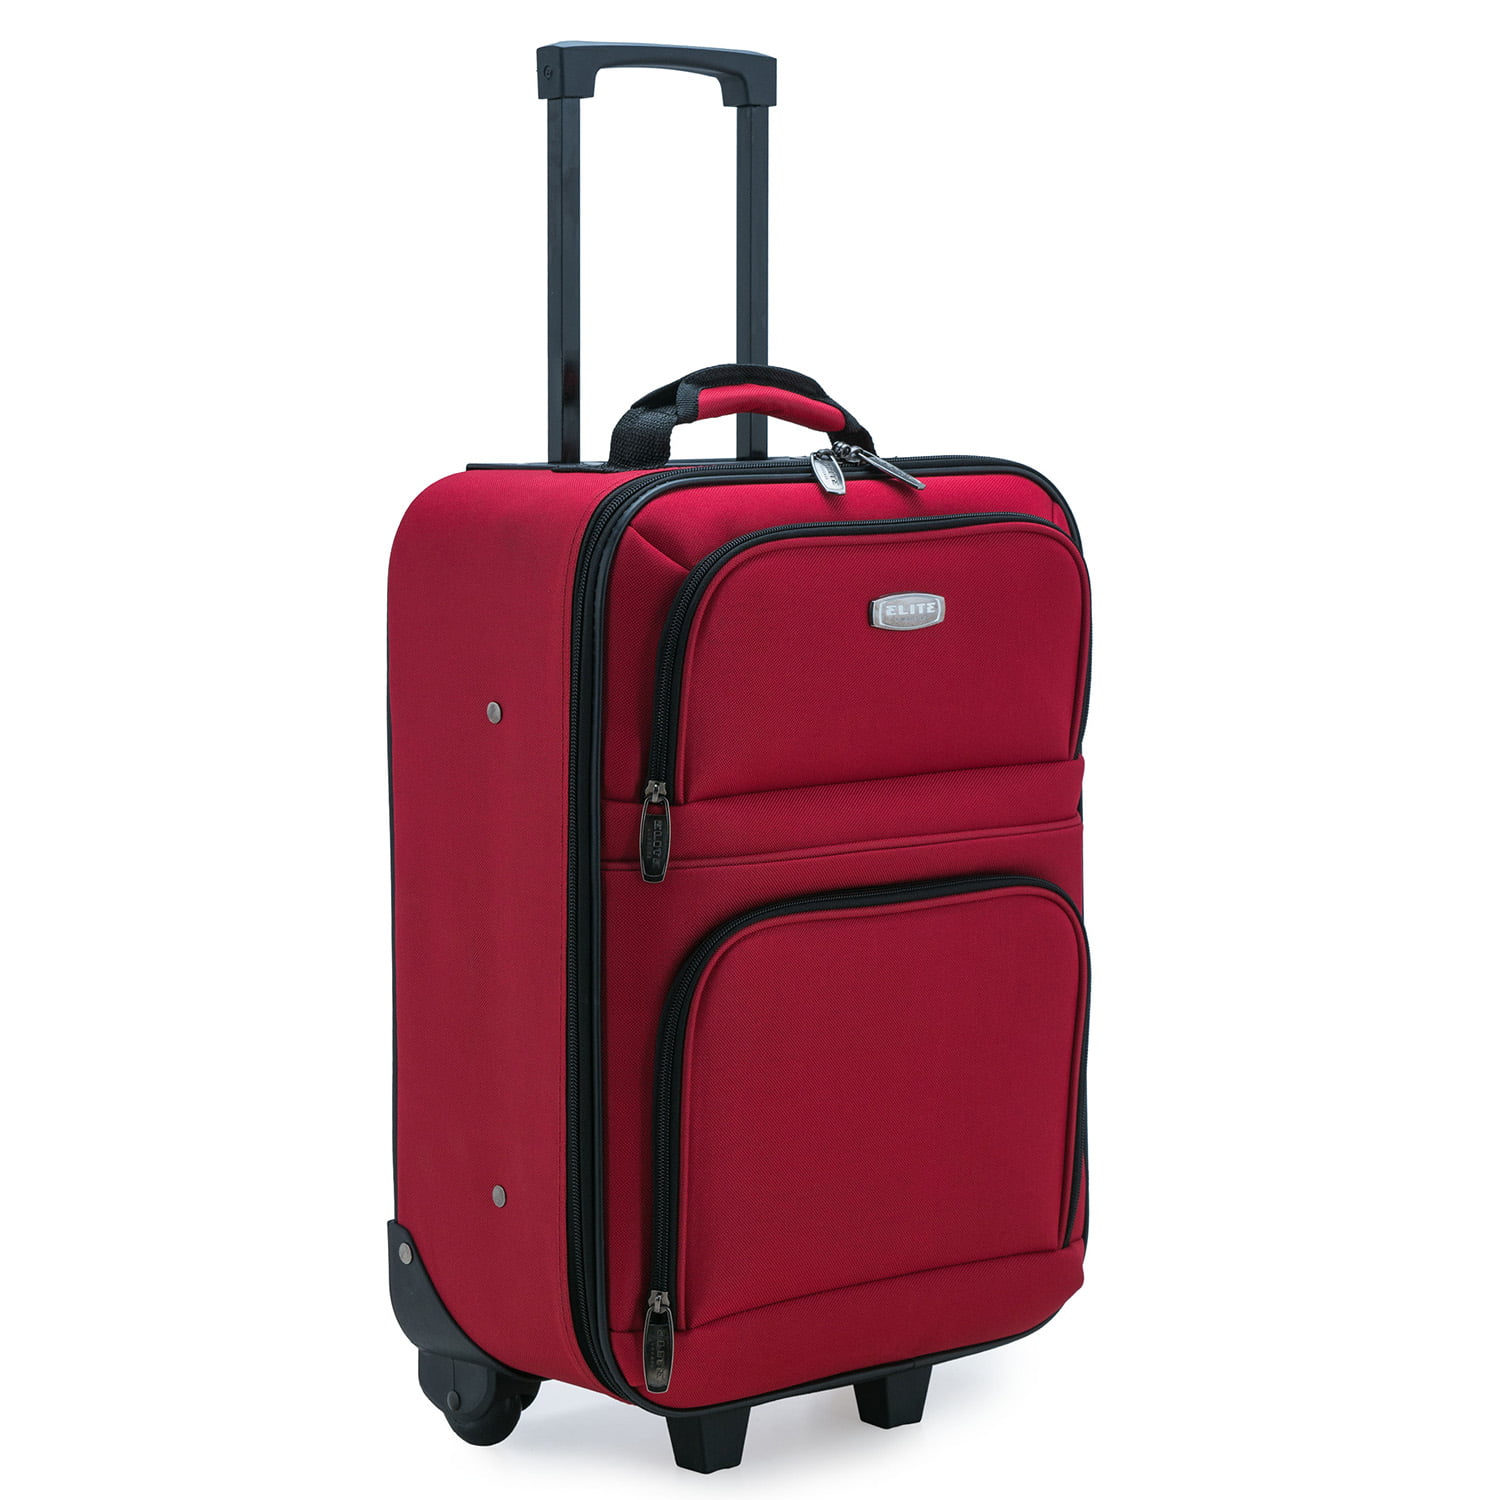 Elite Luggage Meander 19.5&quot; Carry-On Rolling Suitcase with Protective Foam Padding, Red ...